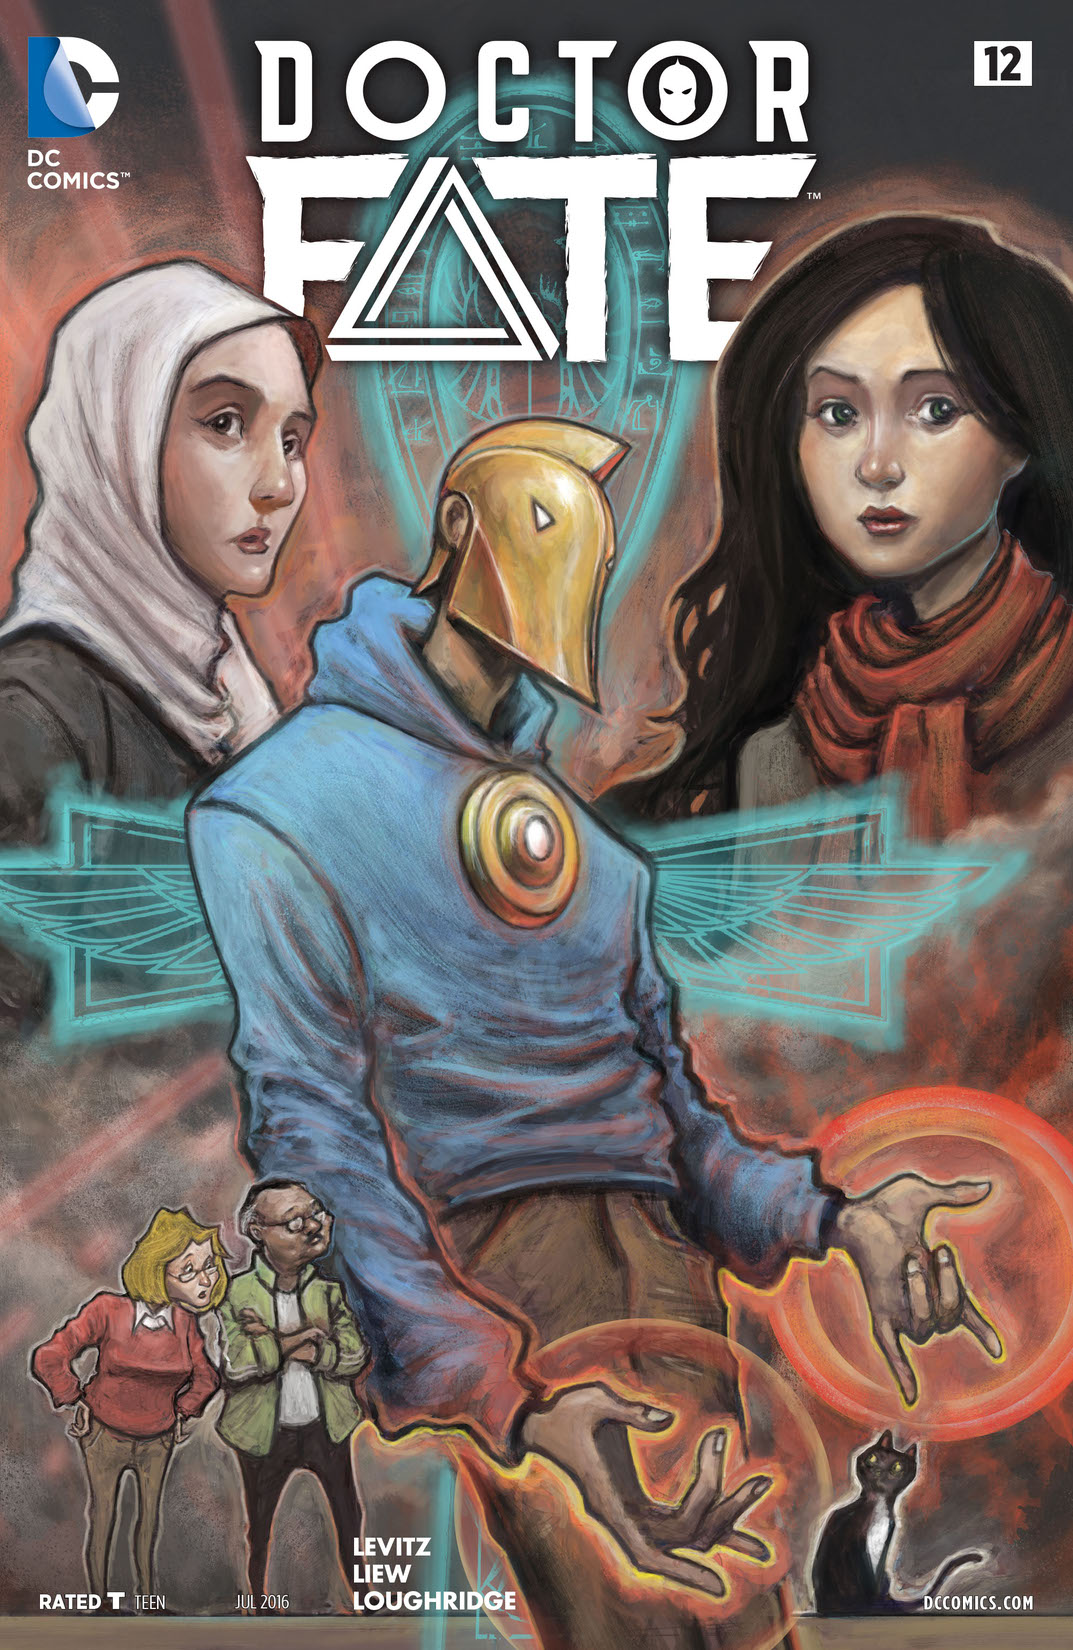 Doctor Fate (2015-) #12 preview images